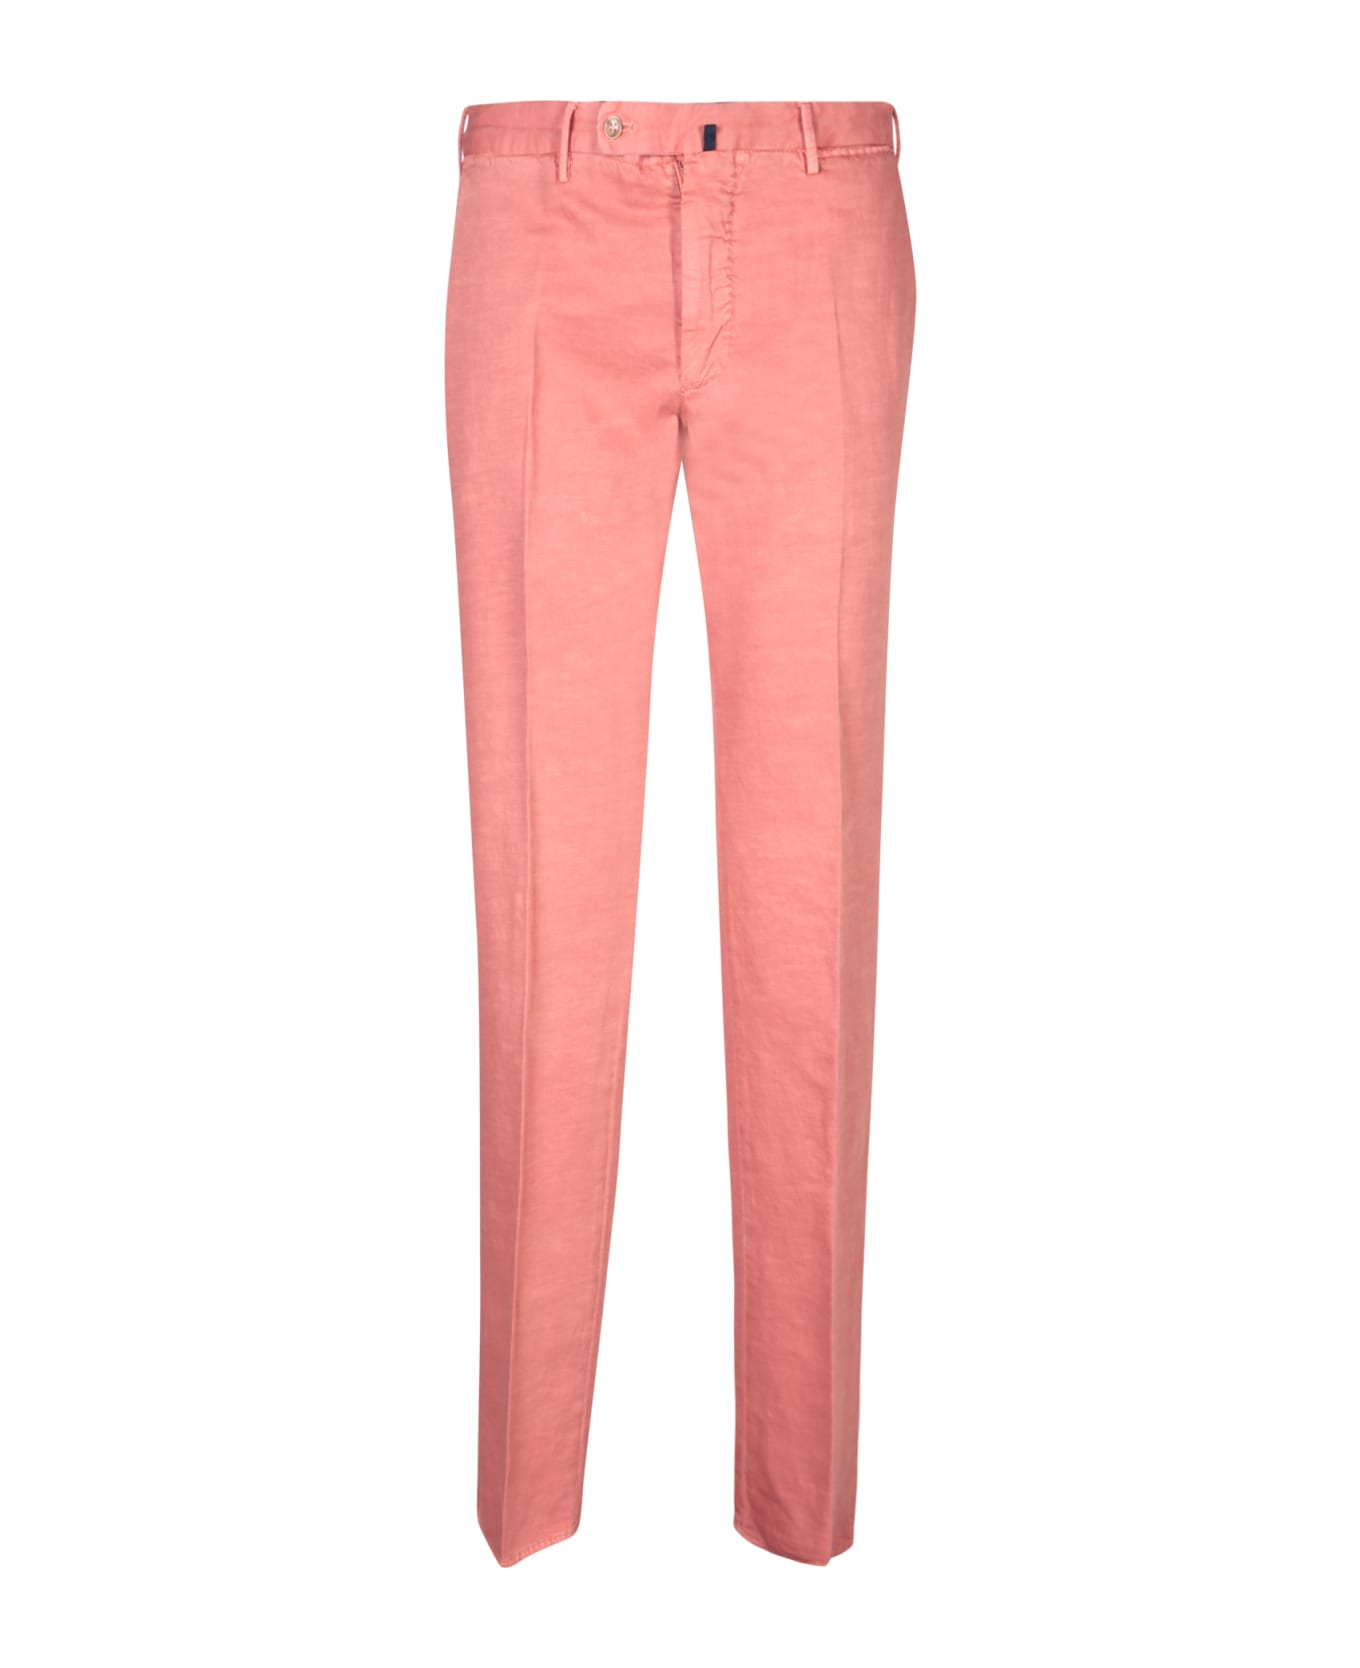 Incotex Pink Chino Linen Trousers - Pink ボトムス